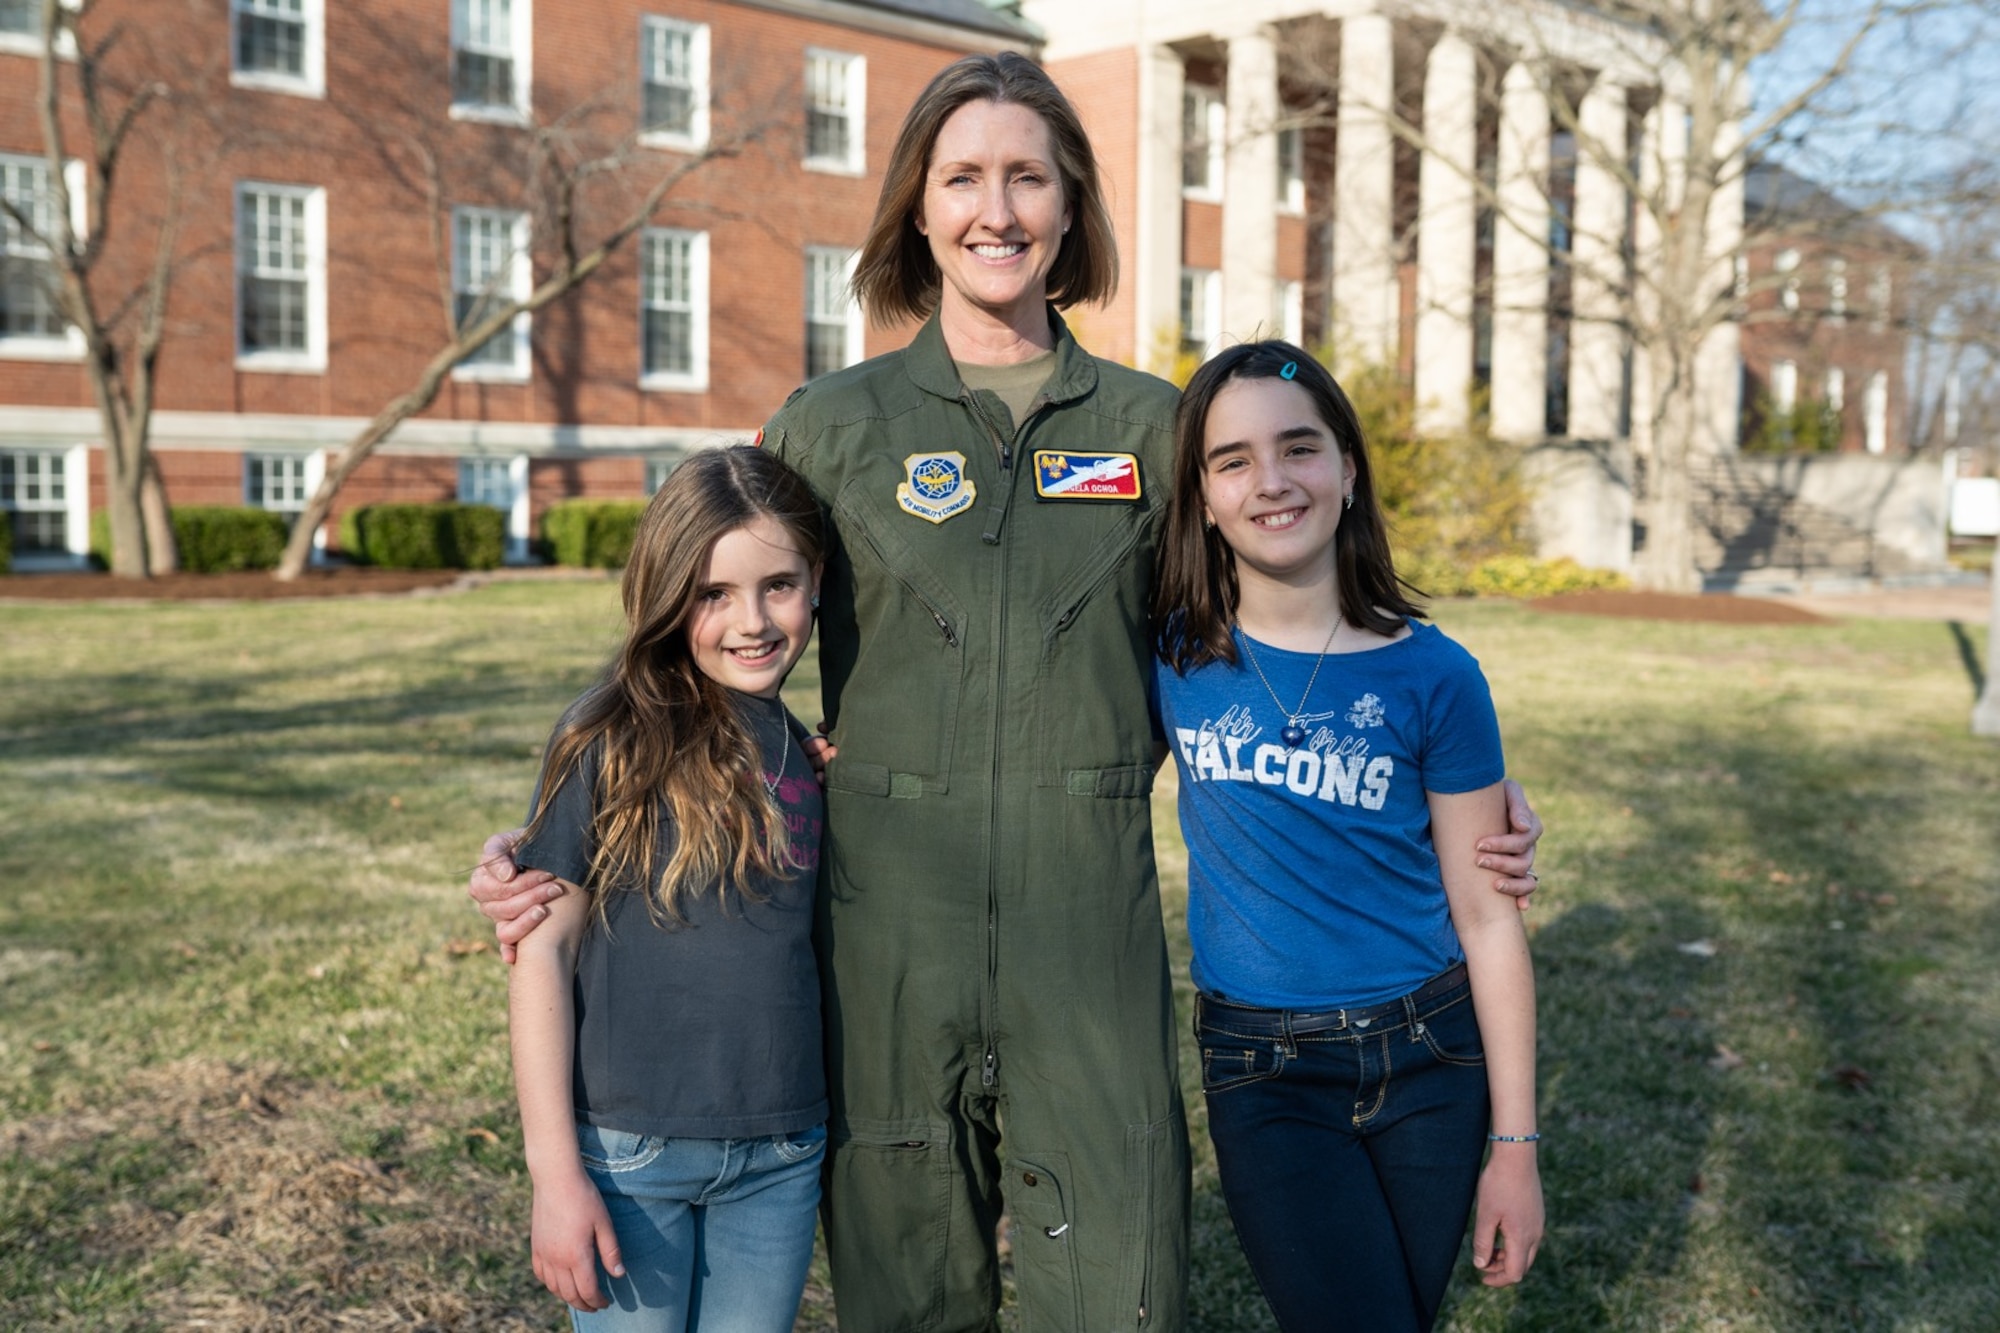 Col. Angela Ochoa, 375th Air Mobility Wing vice commander, gives some counsel to her two daughters, Elsa and Seanna, about how to courageously lead based on some of her experiences she has had while in the Air Force. (USAF Photo by 1st. Lt. Sam Eckholm)